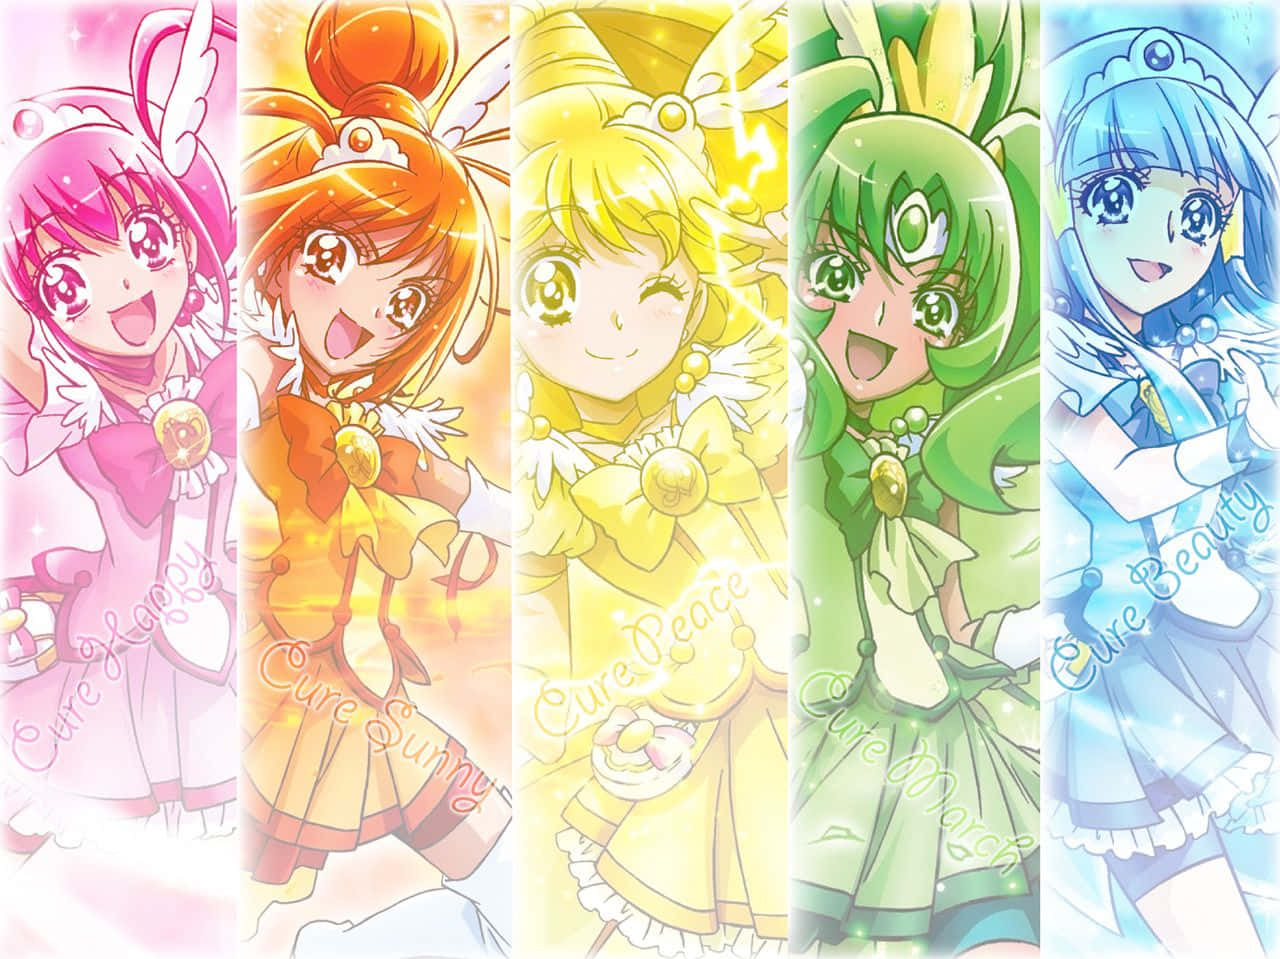 Looking Strong and Stylish - The Glitter Force Wallpaper